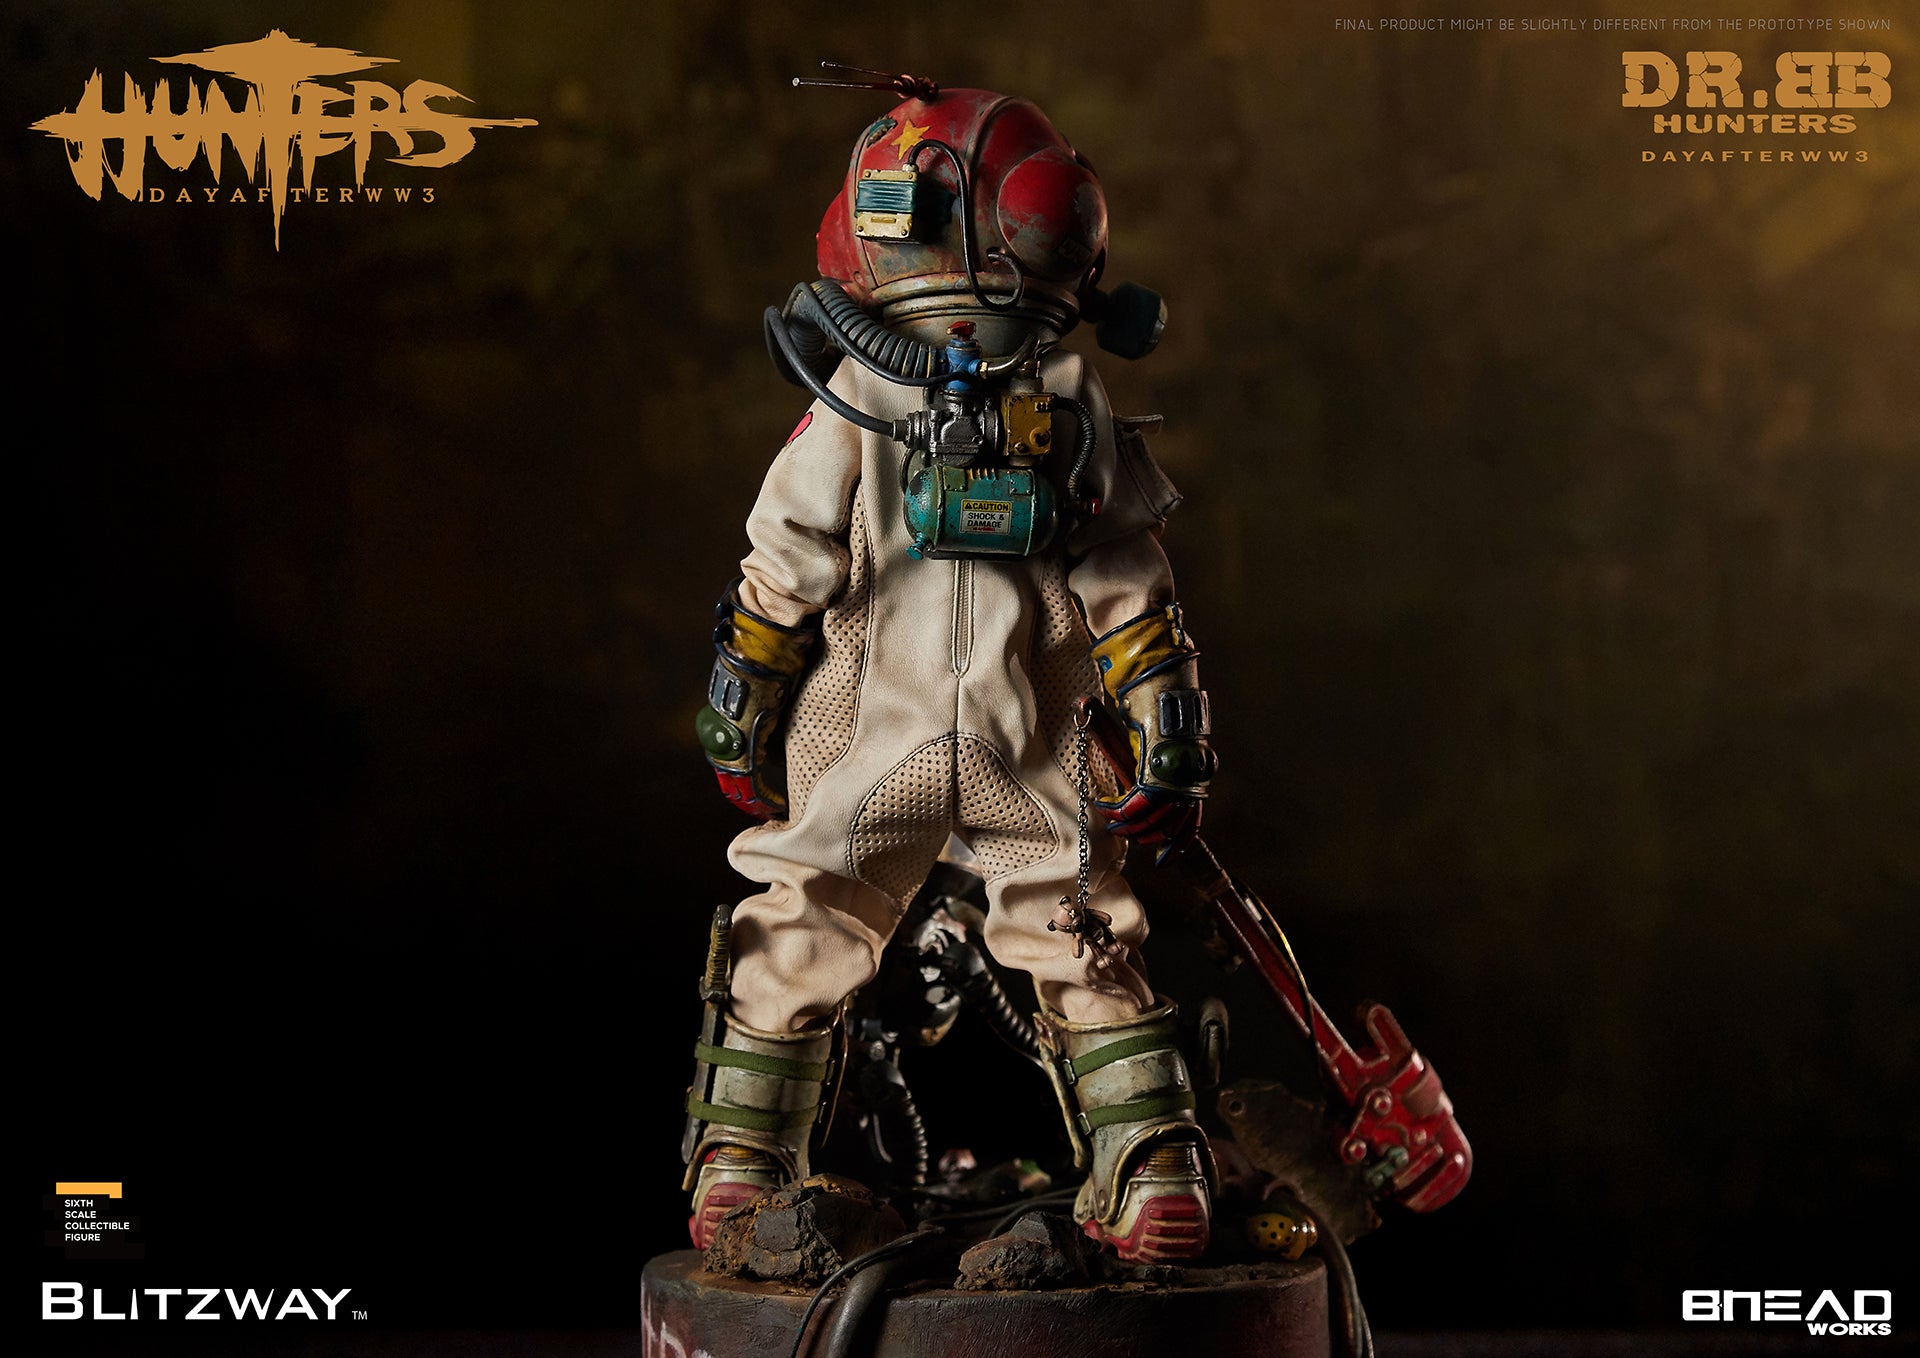 Blitzway Hunters Day After WWIII Dr. BB 1/6 Scale Collectible 